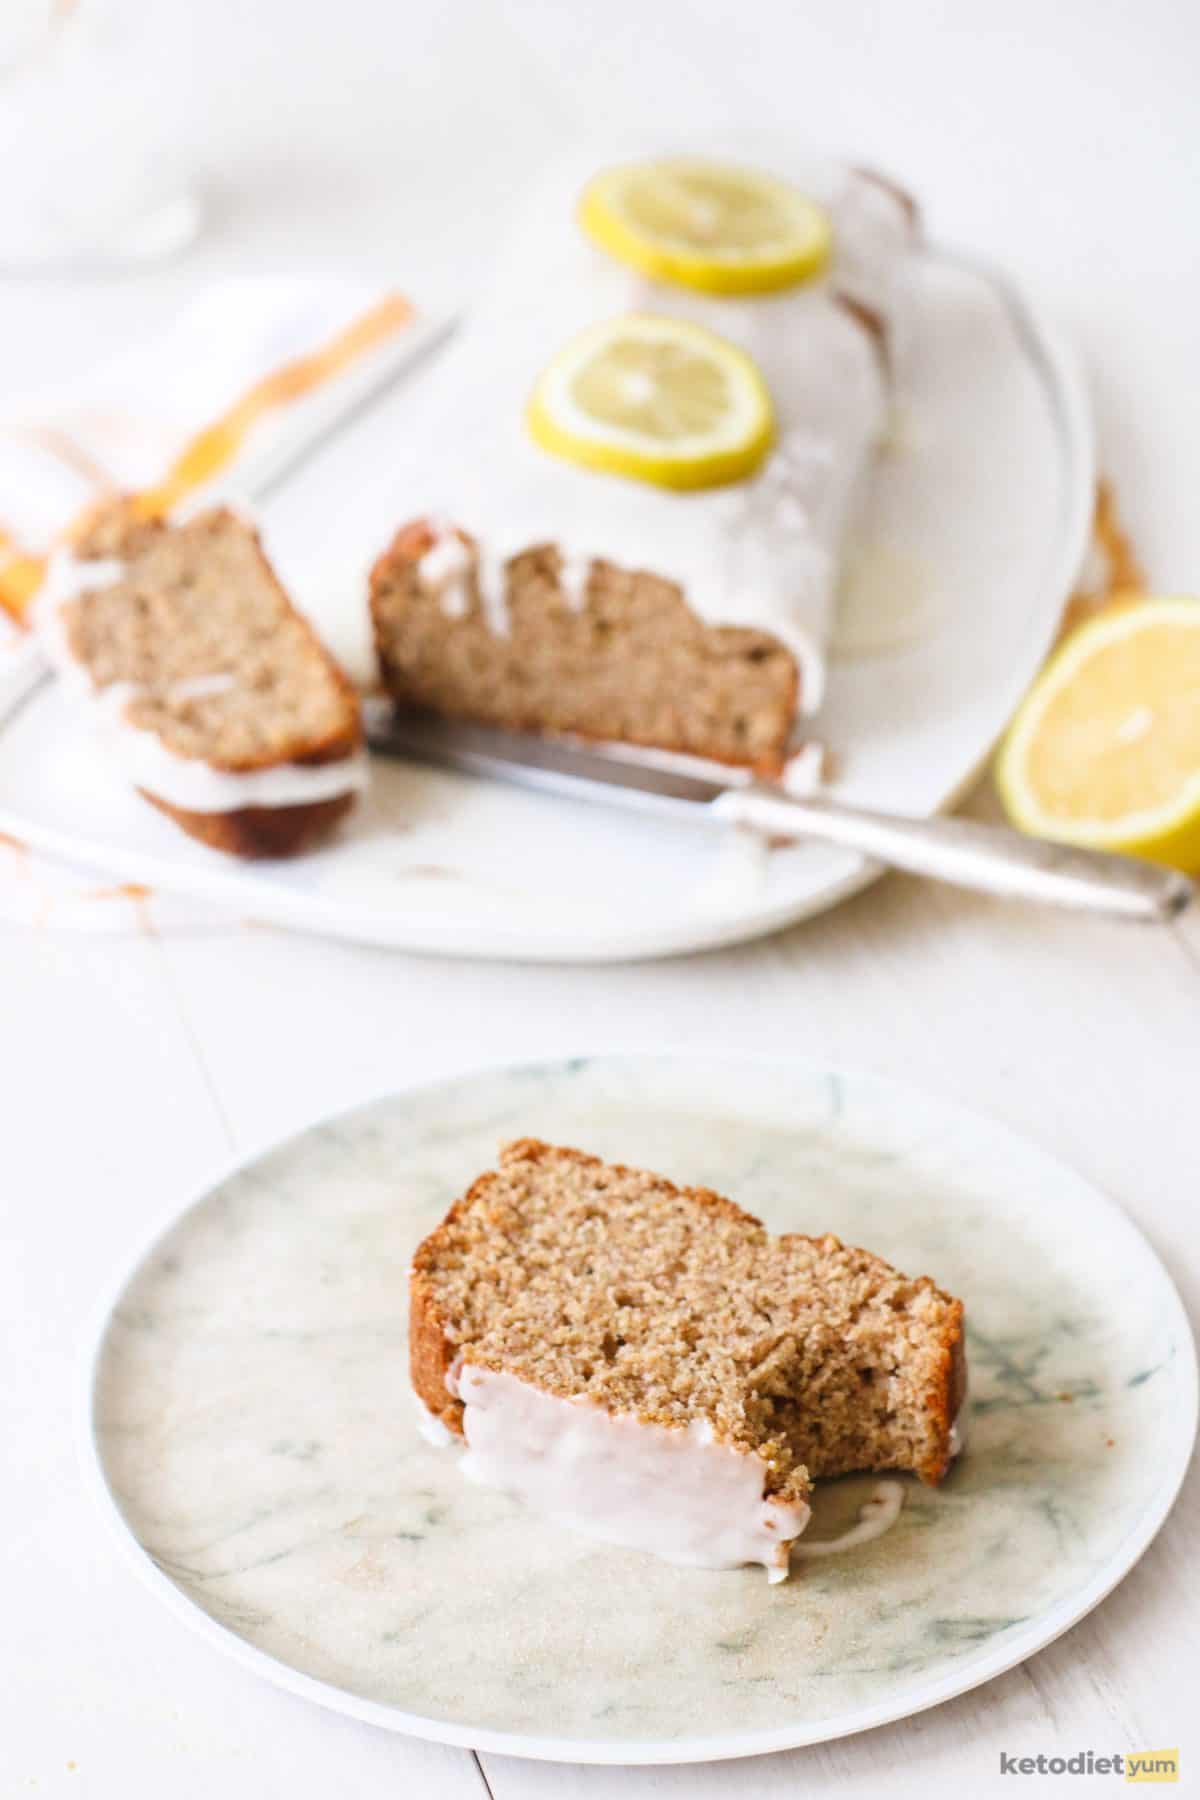 A slice of keto lemon pound cake on a plate with the whole loaf in the background